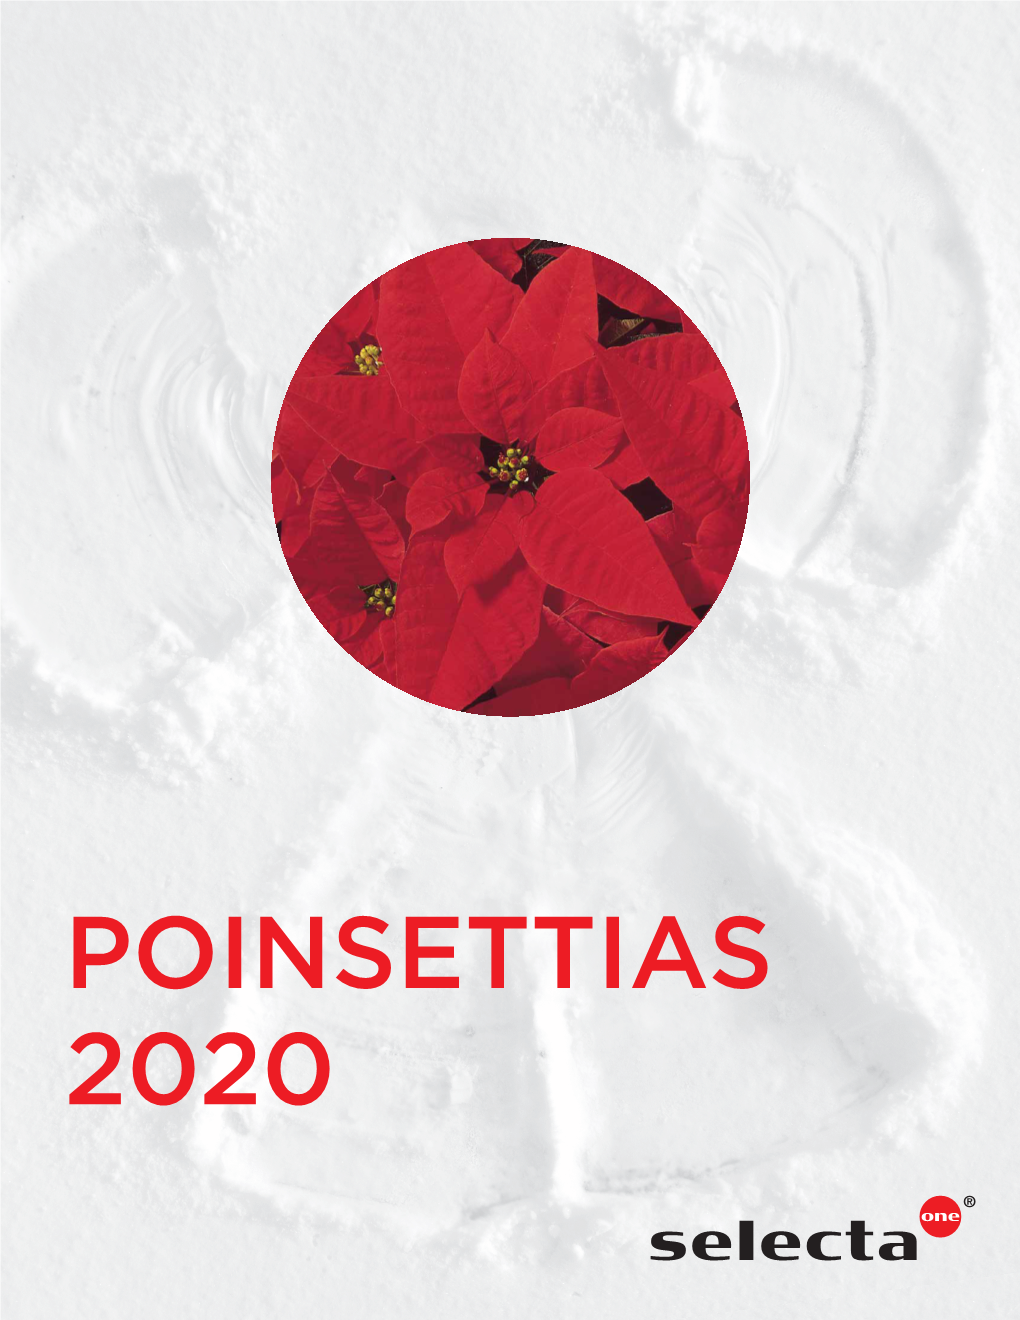 Poinsettias 2020 Selected for Success